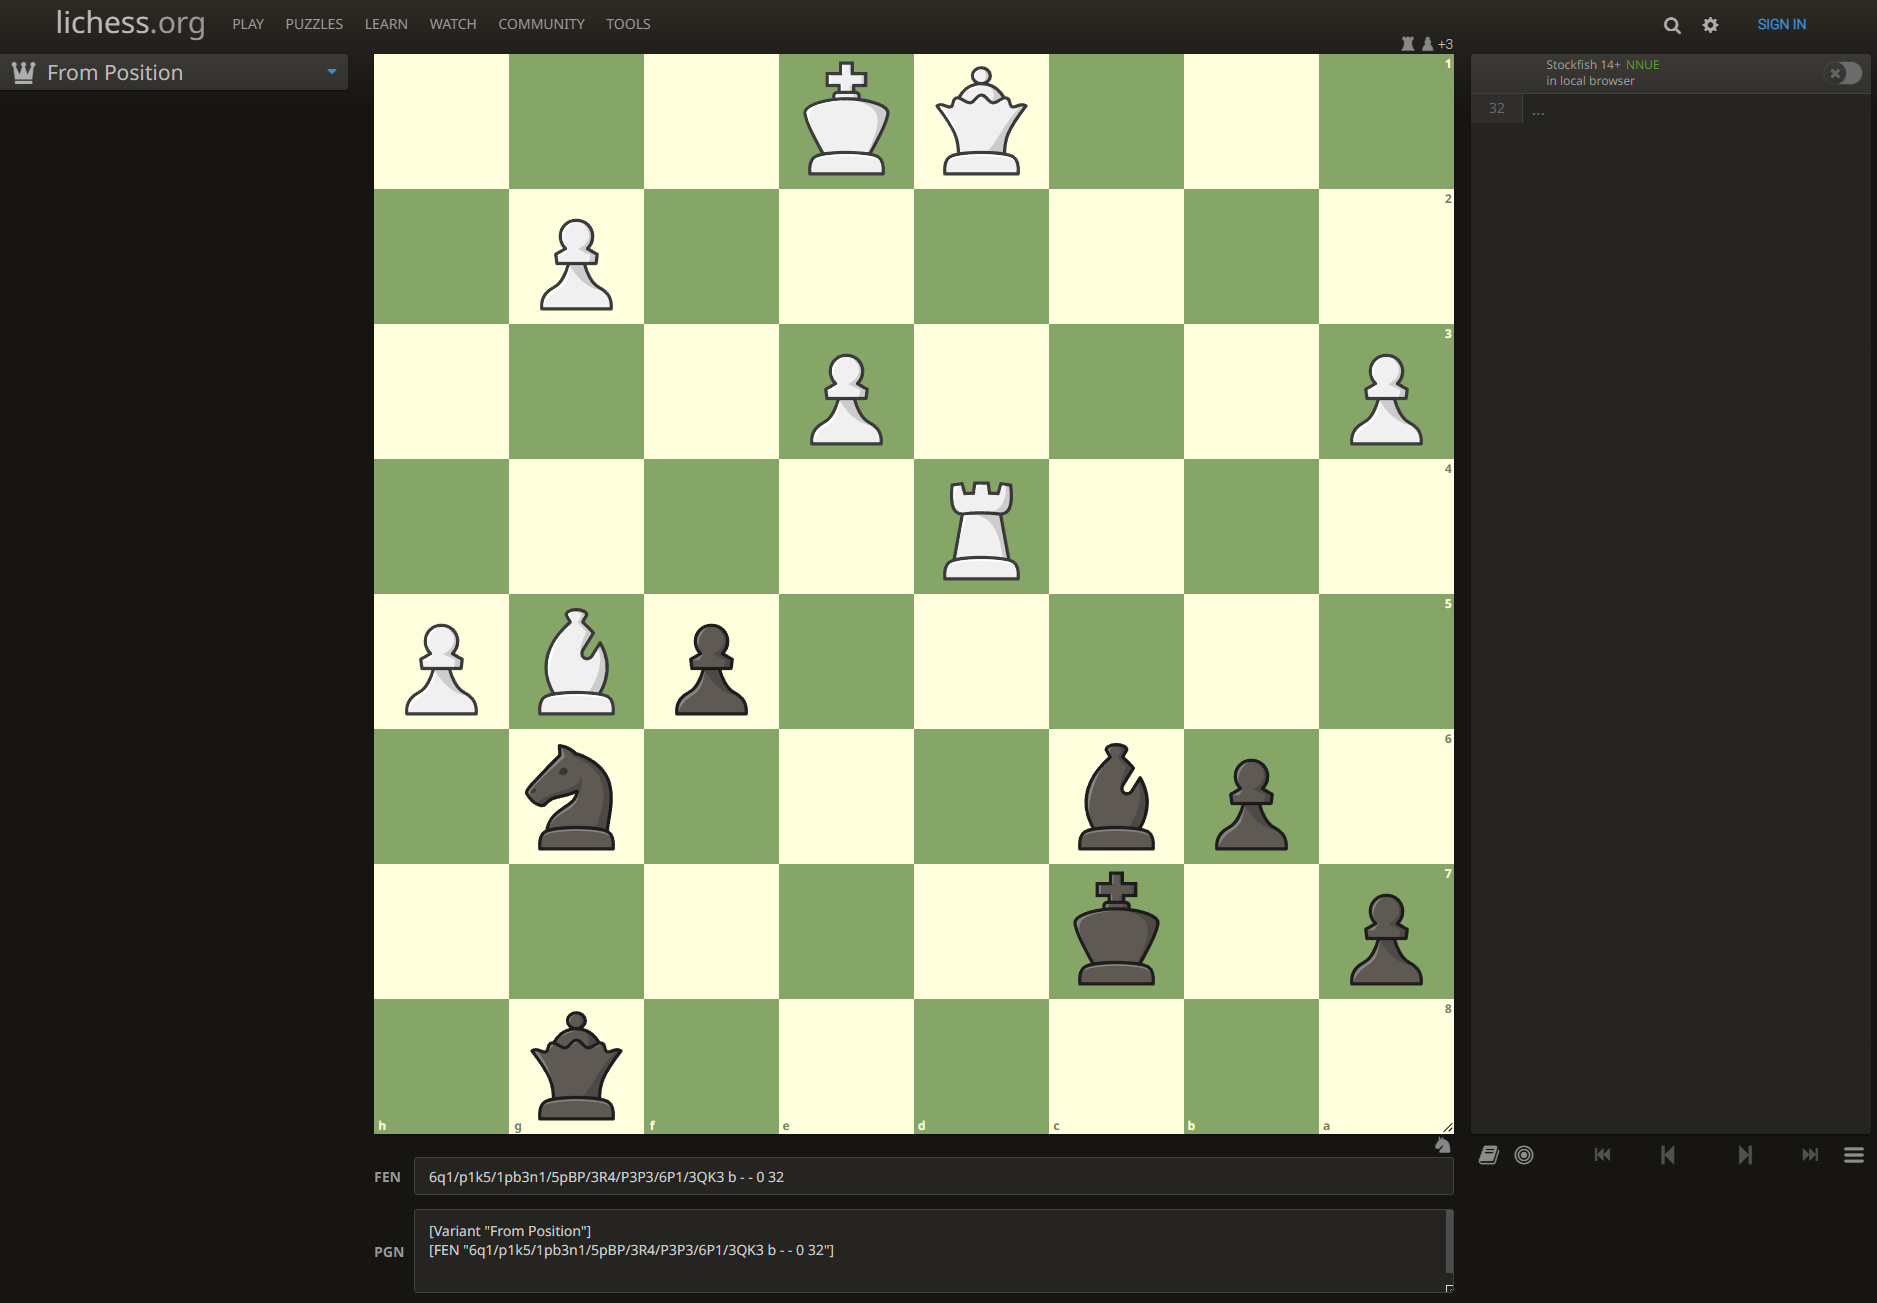 Chess position for the FEN string